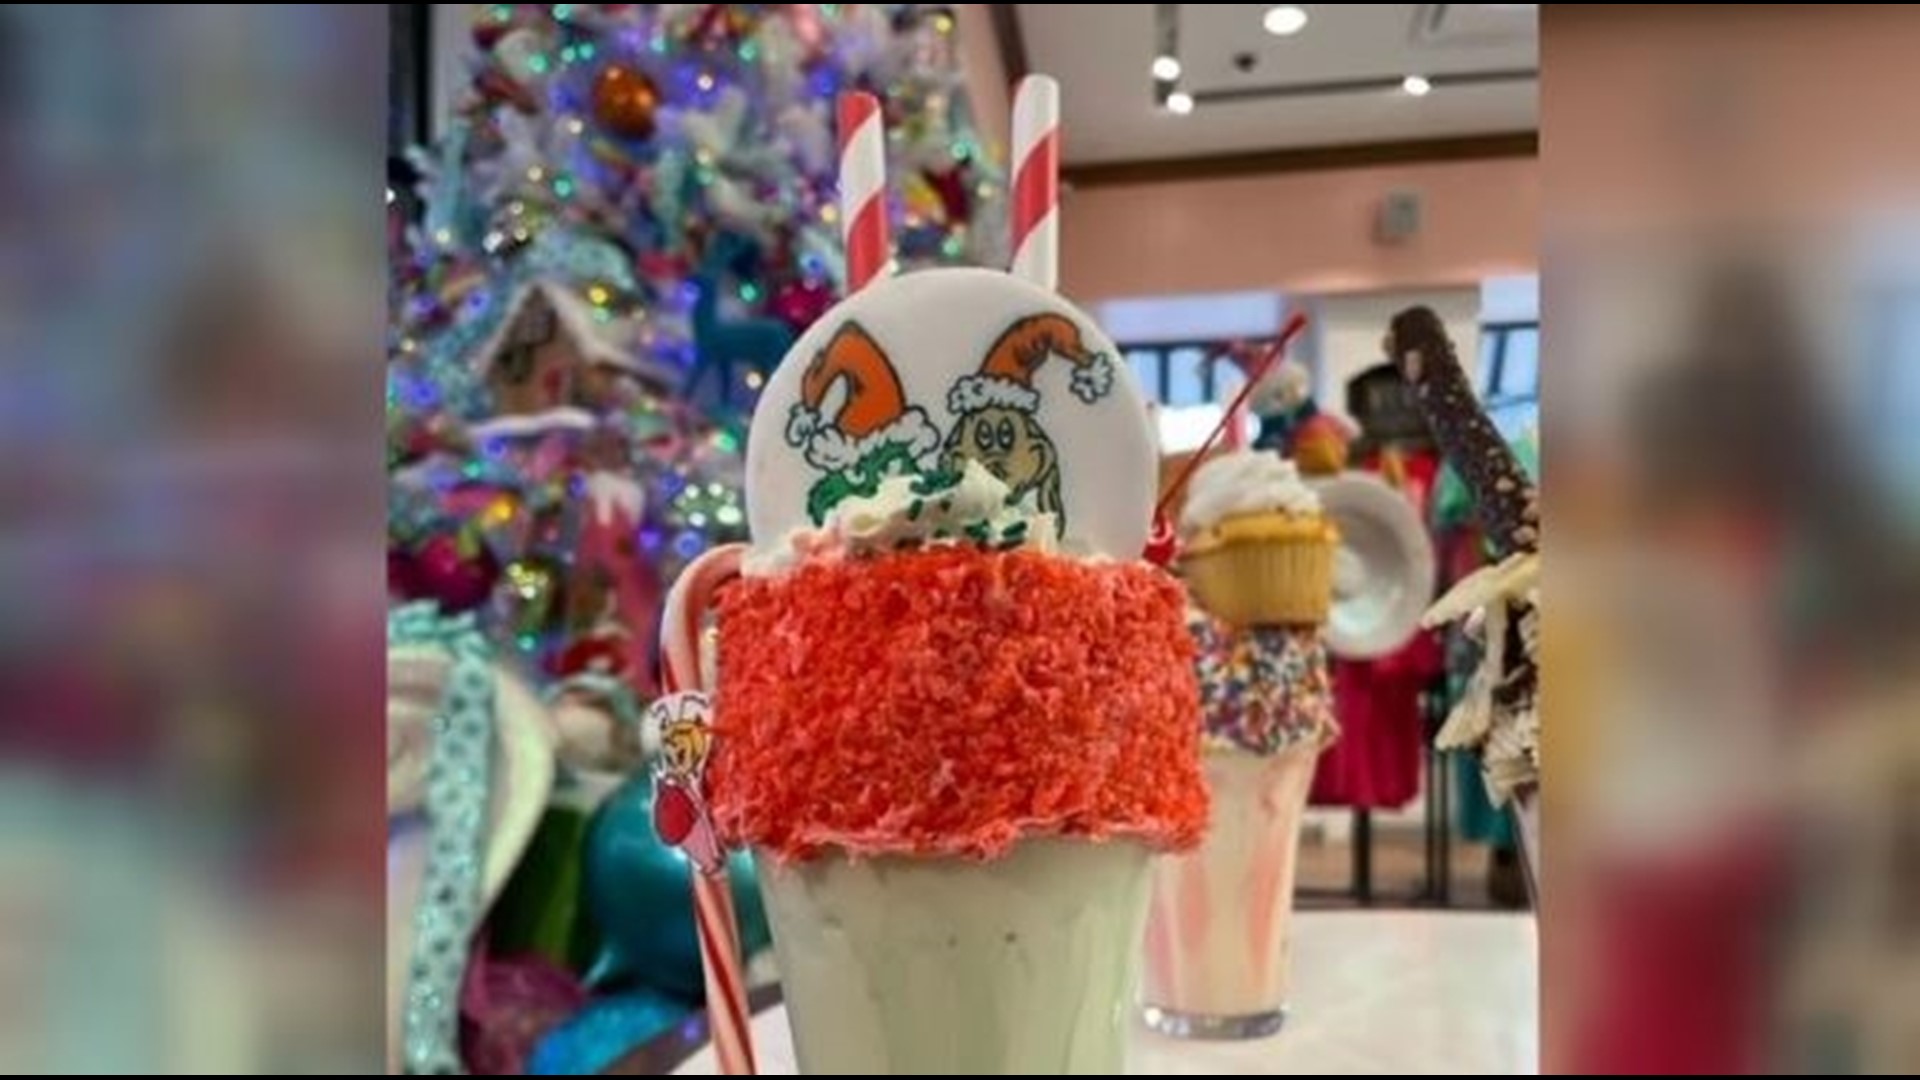 Not only is the Grinch stealing Christmas this holiday season, but he’s stealing hearts too. The Soda Fountain now offers green Grinch 'Freak Shake.'